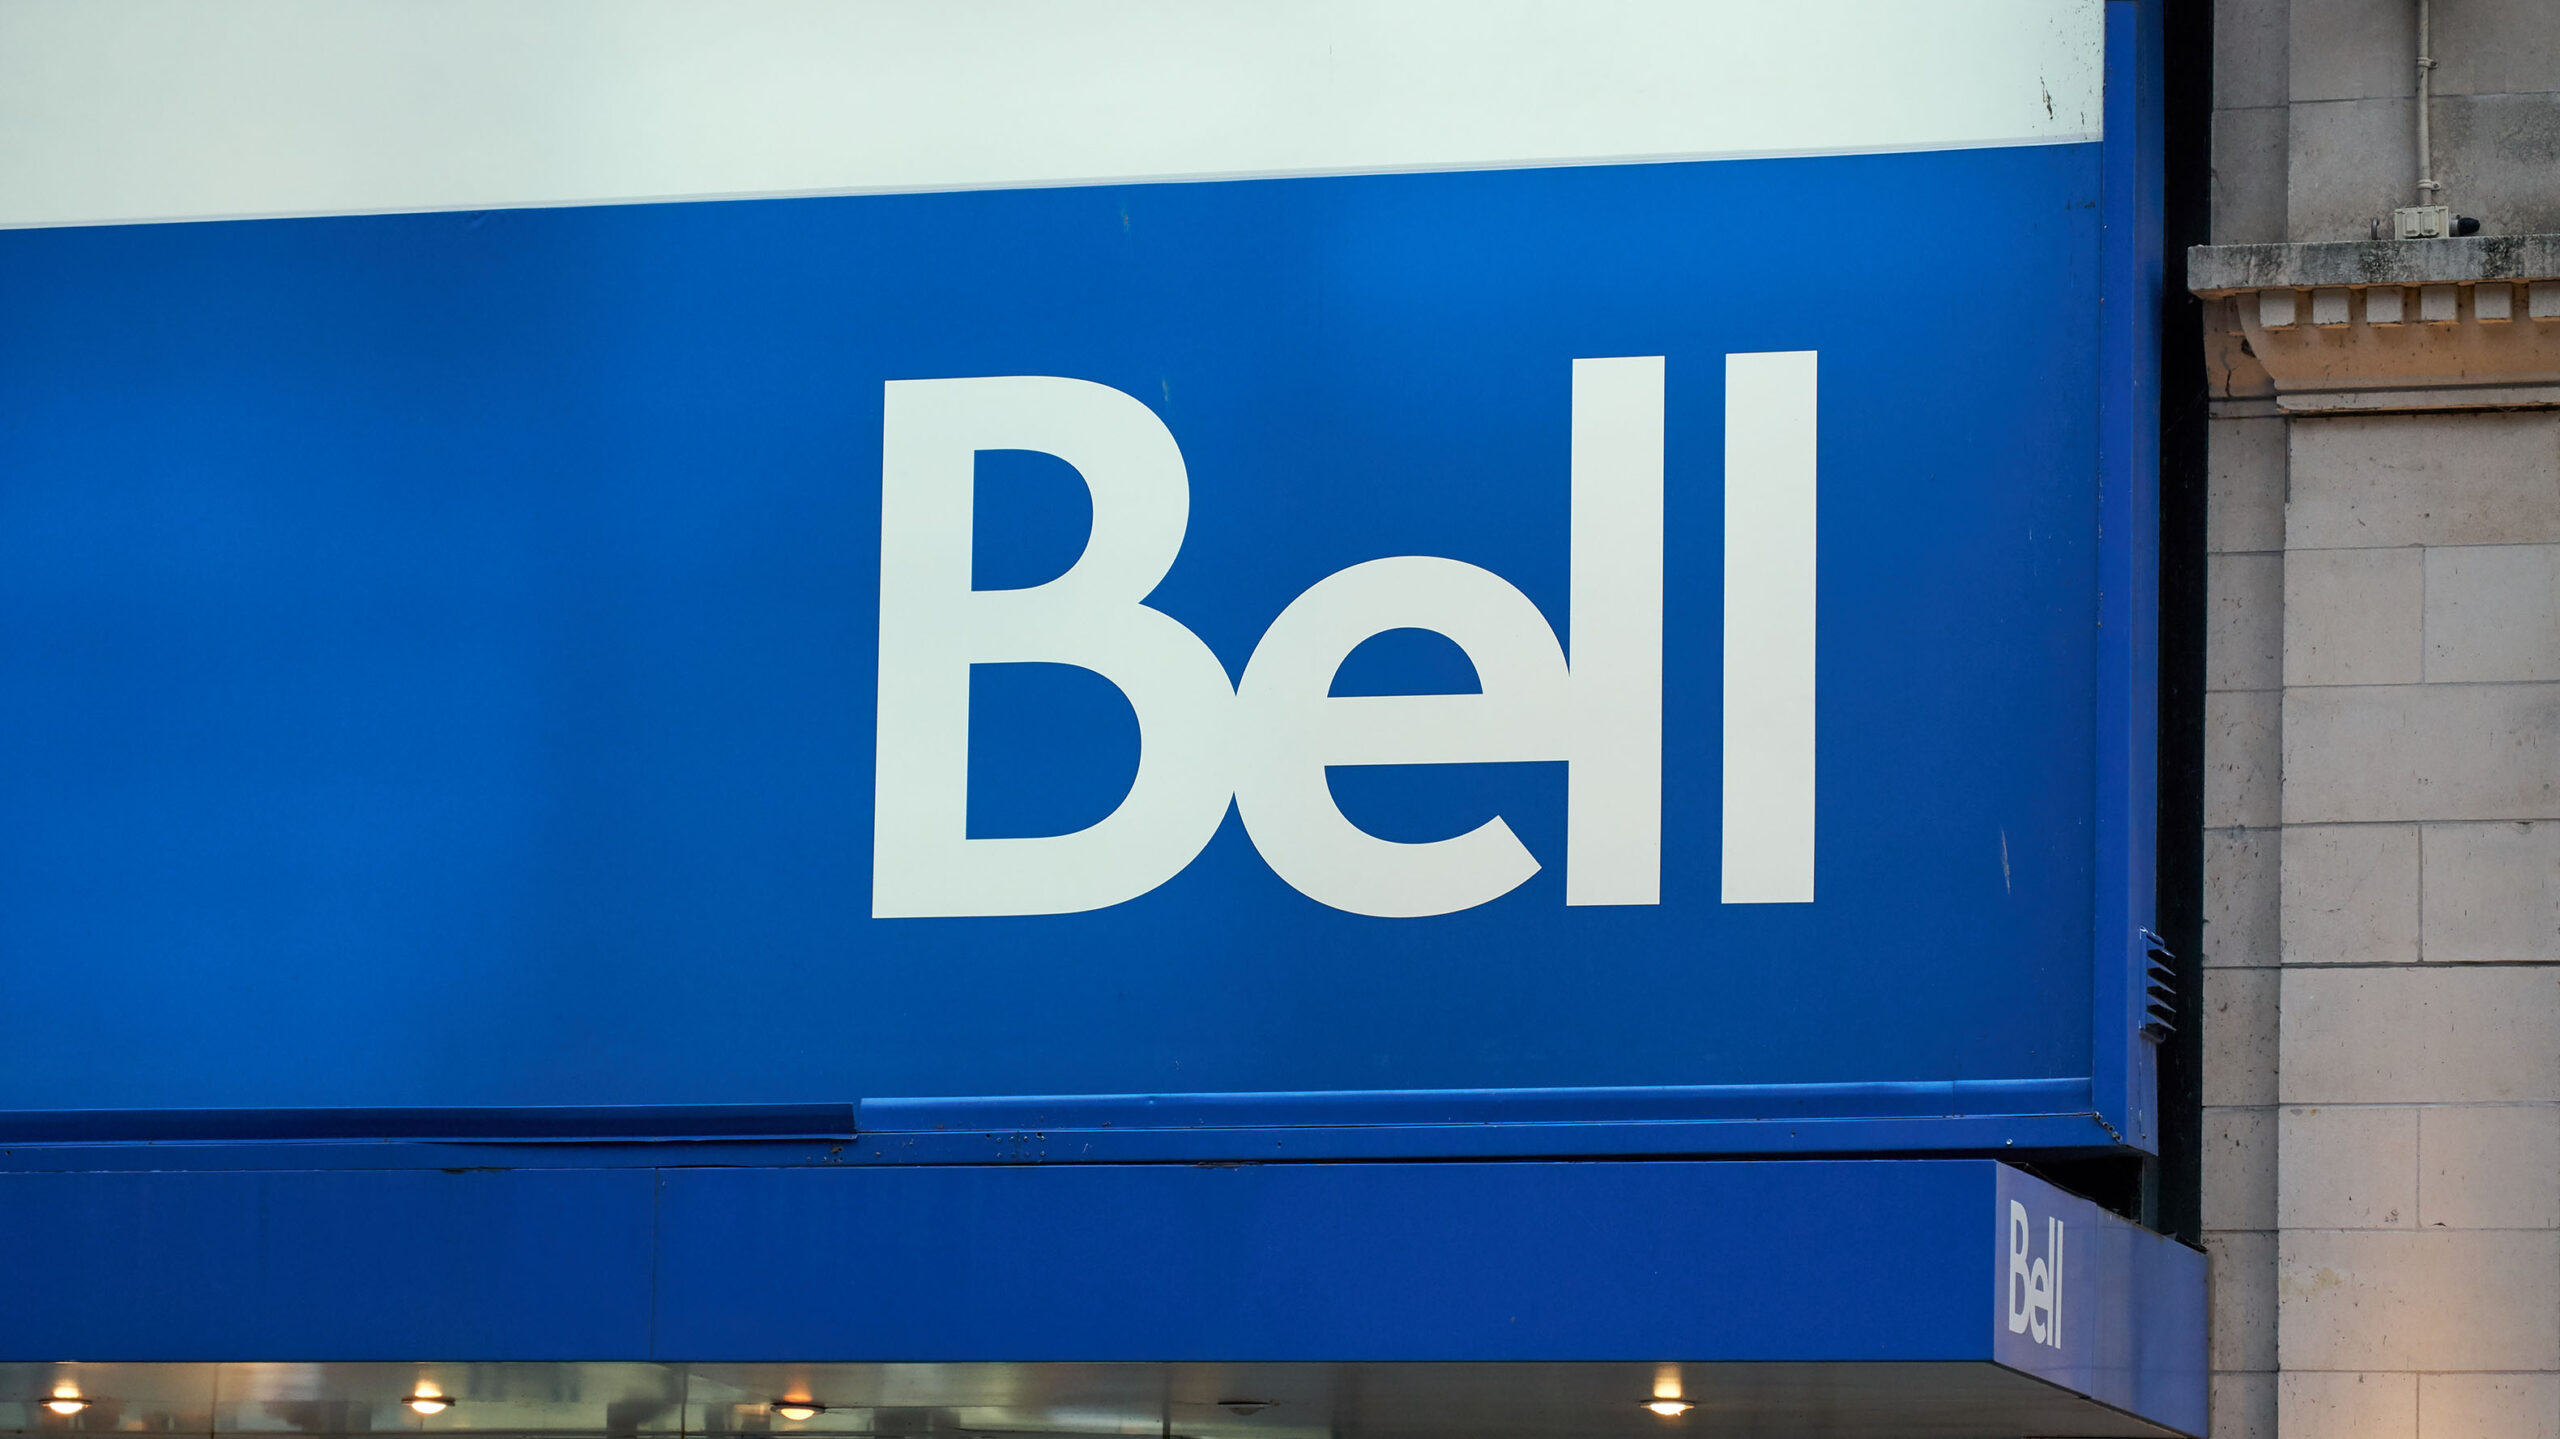 Bell customers with internet packages higher than 3Gbps won’t be impacted by speed cap